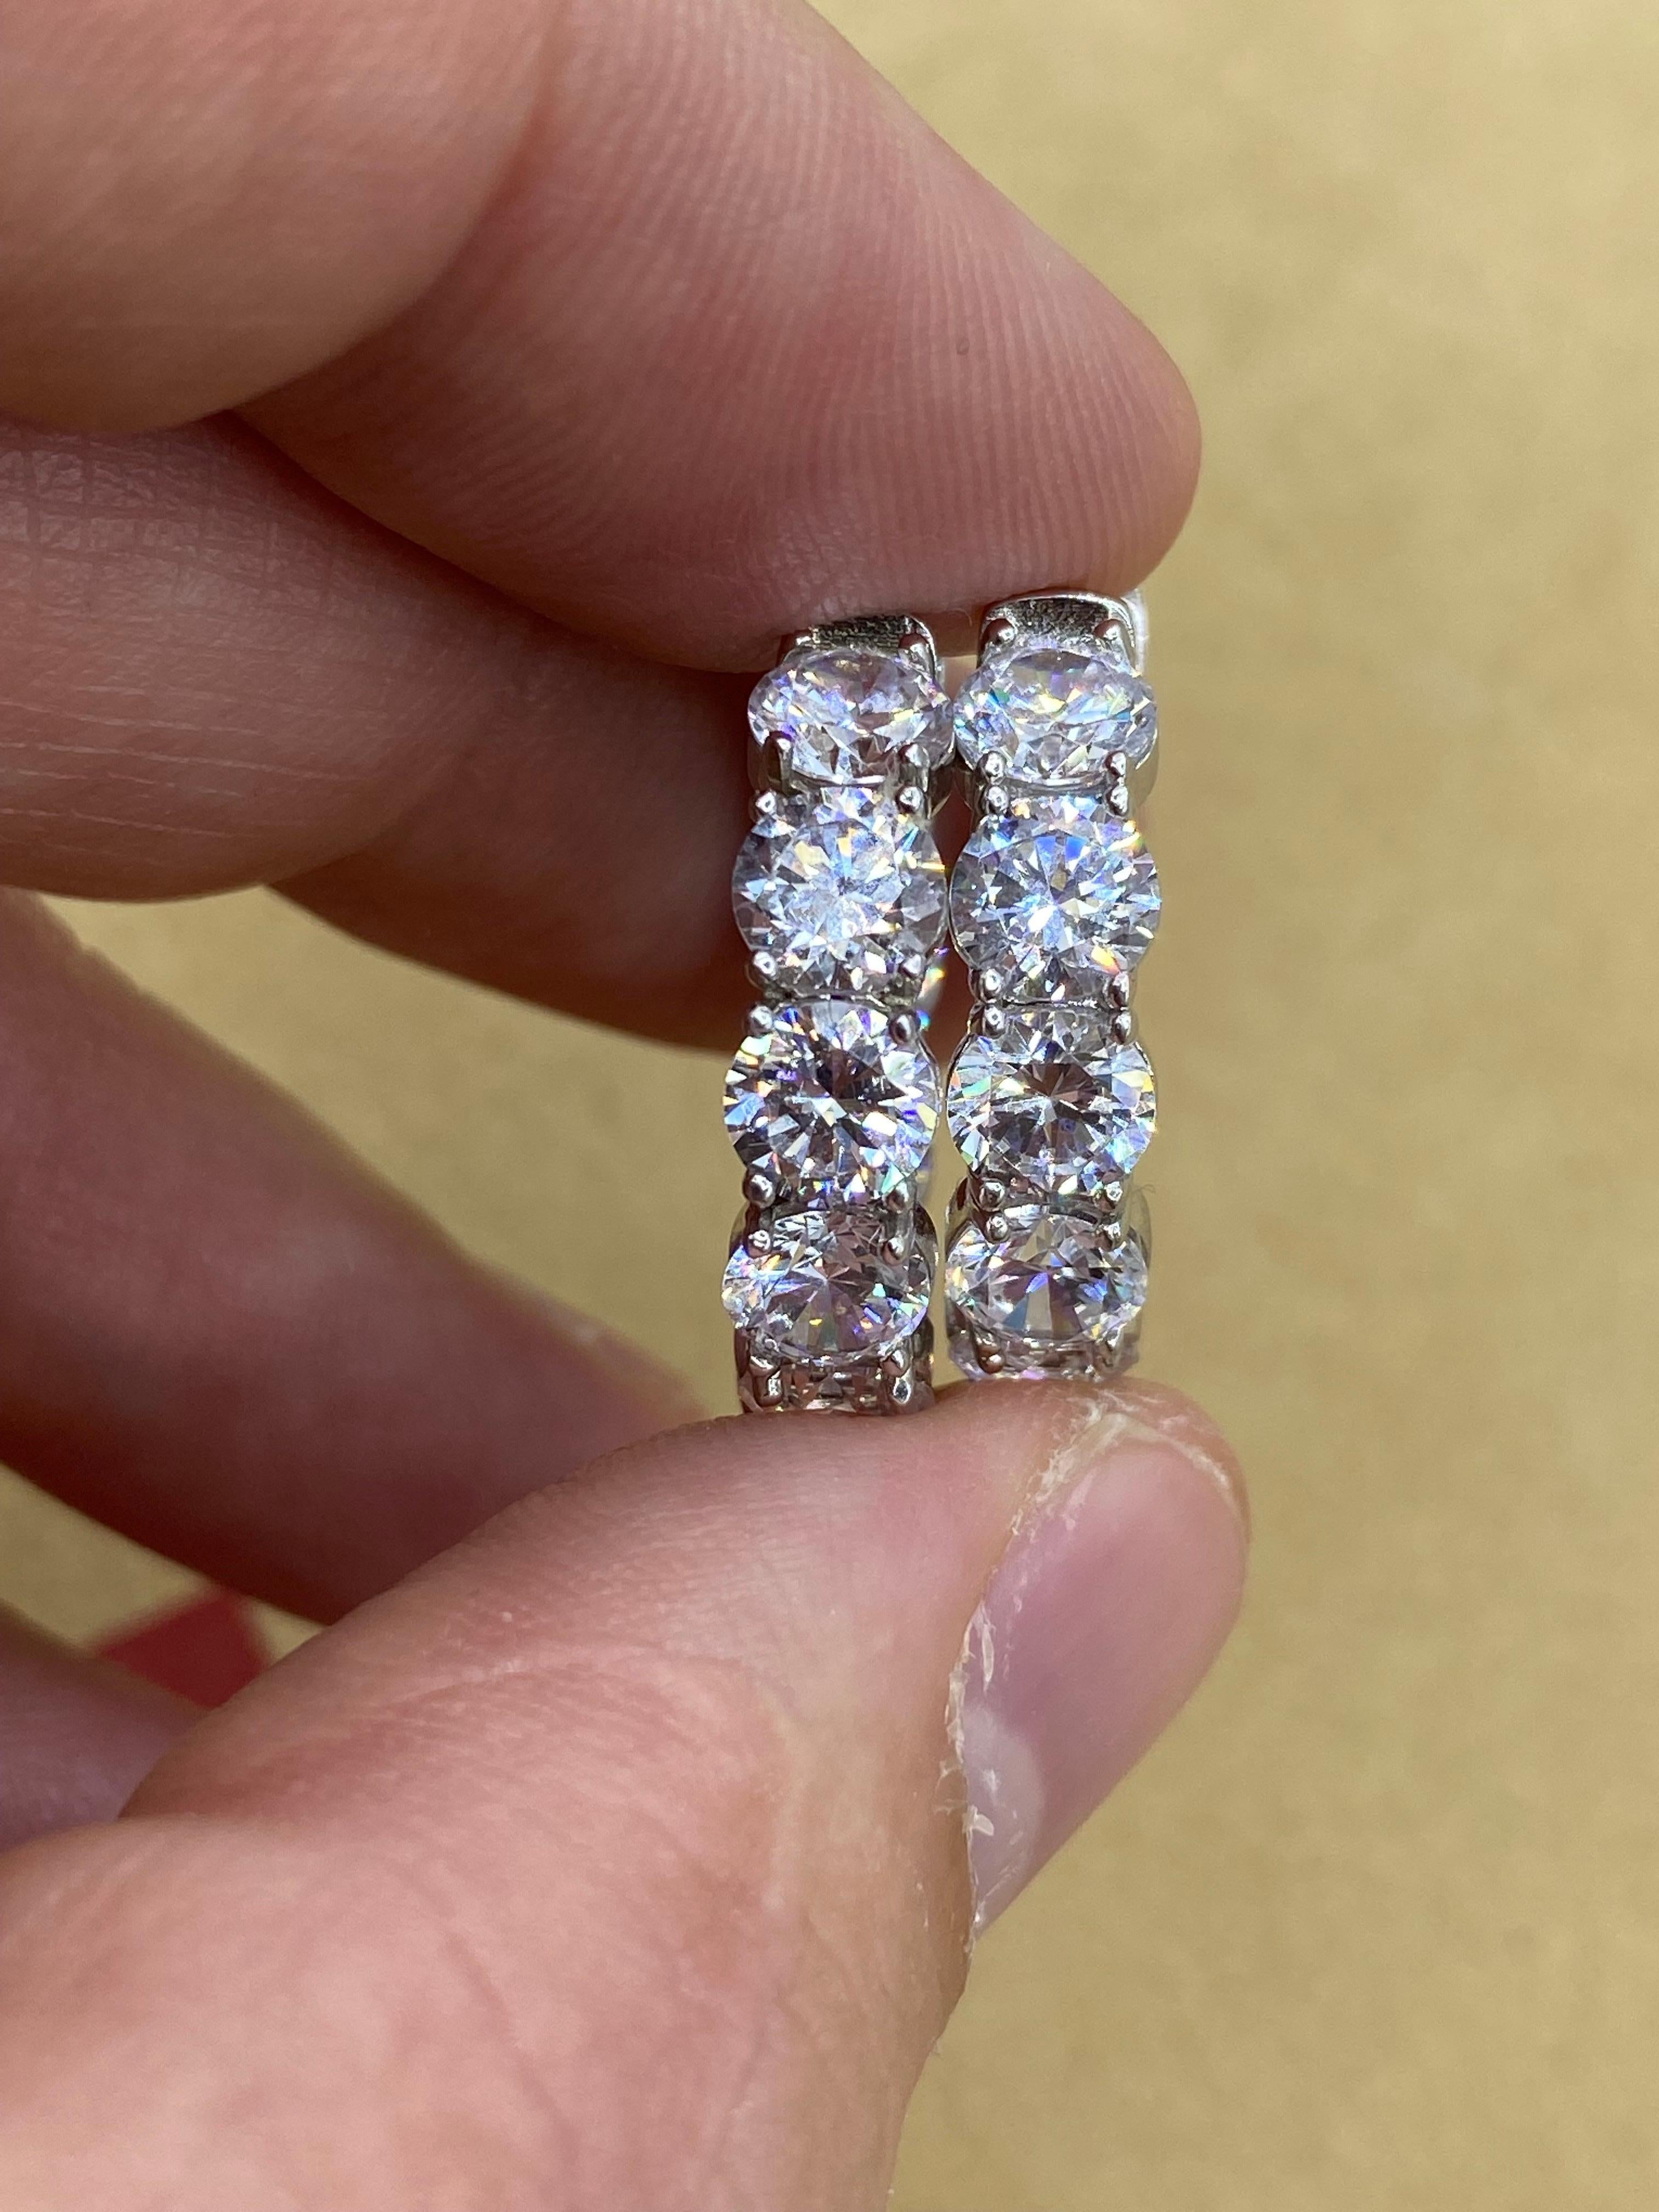 From the vault at Emilio Jewelry New York,

All manufactured by Emilio Jewelry New York, Featuring the largest inventory of inside out diamond hoops with over 300 different stone sizes, and diameters available so please inquire for anything in